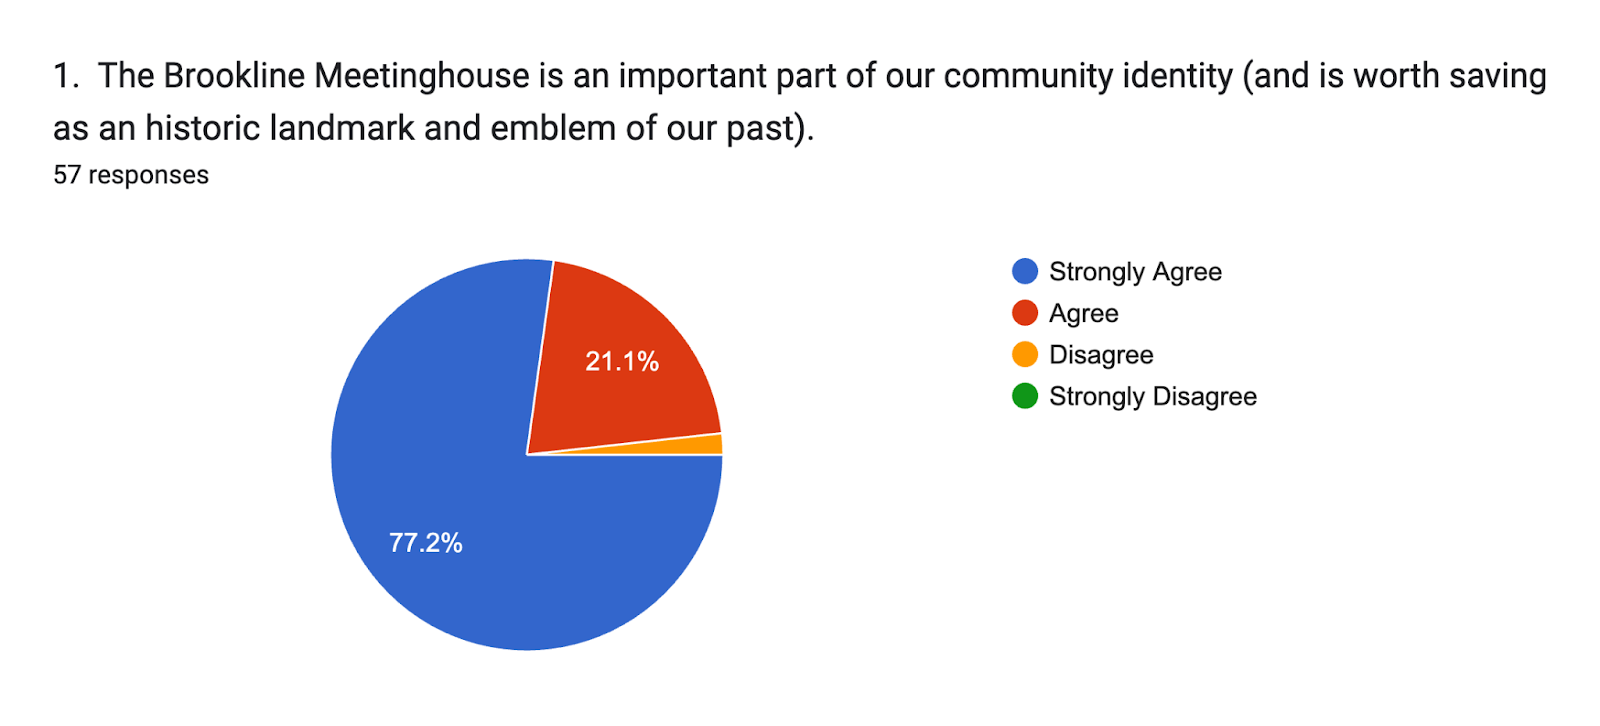 Forms response chart. Question title: 1.  The Brookline Meetinghouse is an important part of our community identity (and is worth saving as an historic landmark and emblem of our past).
. Number of responses: 57 responses.